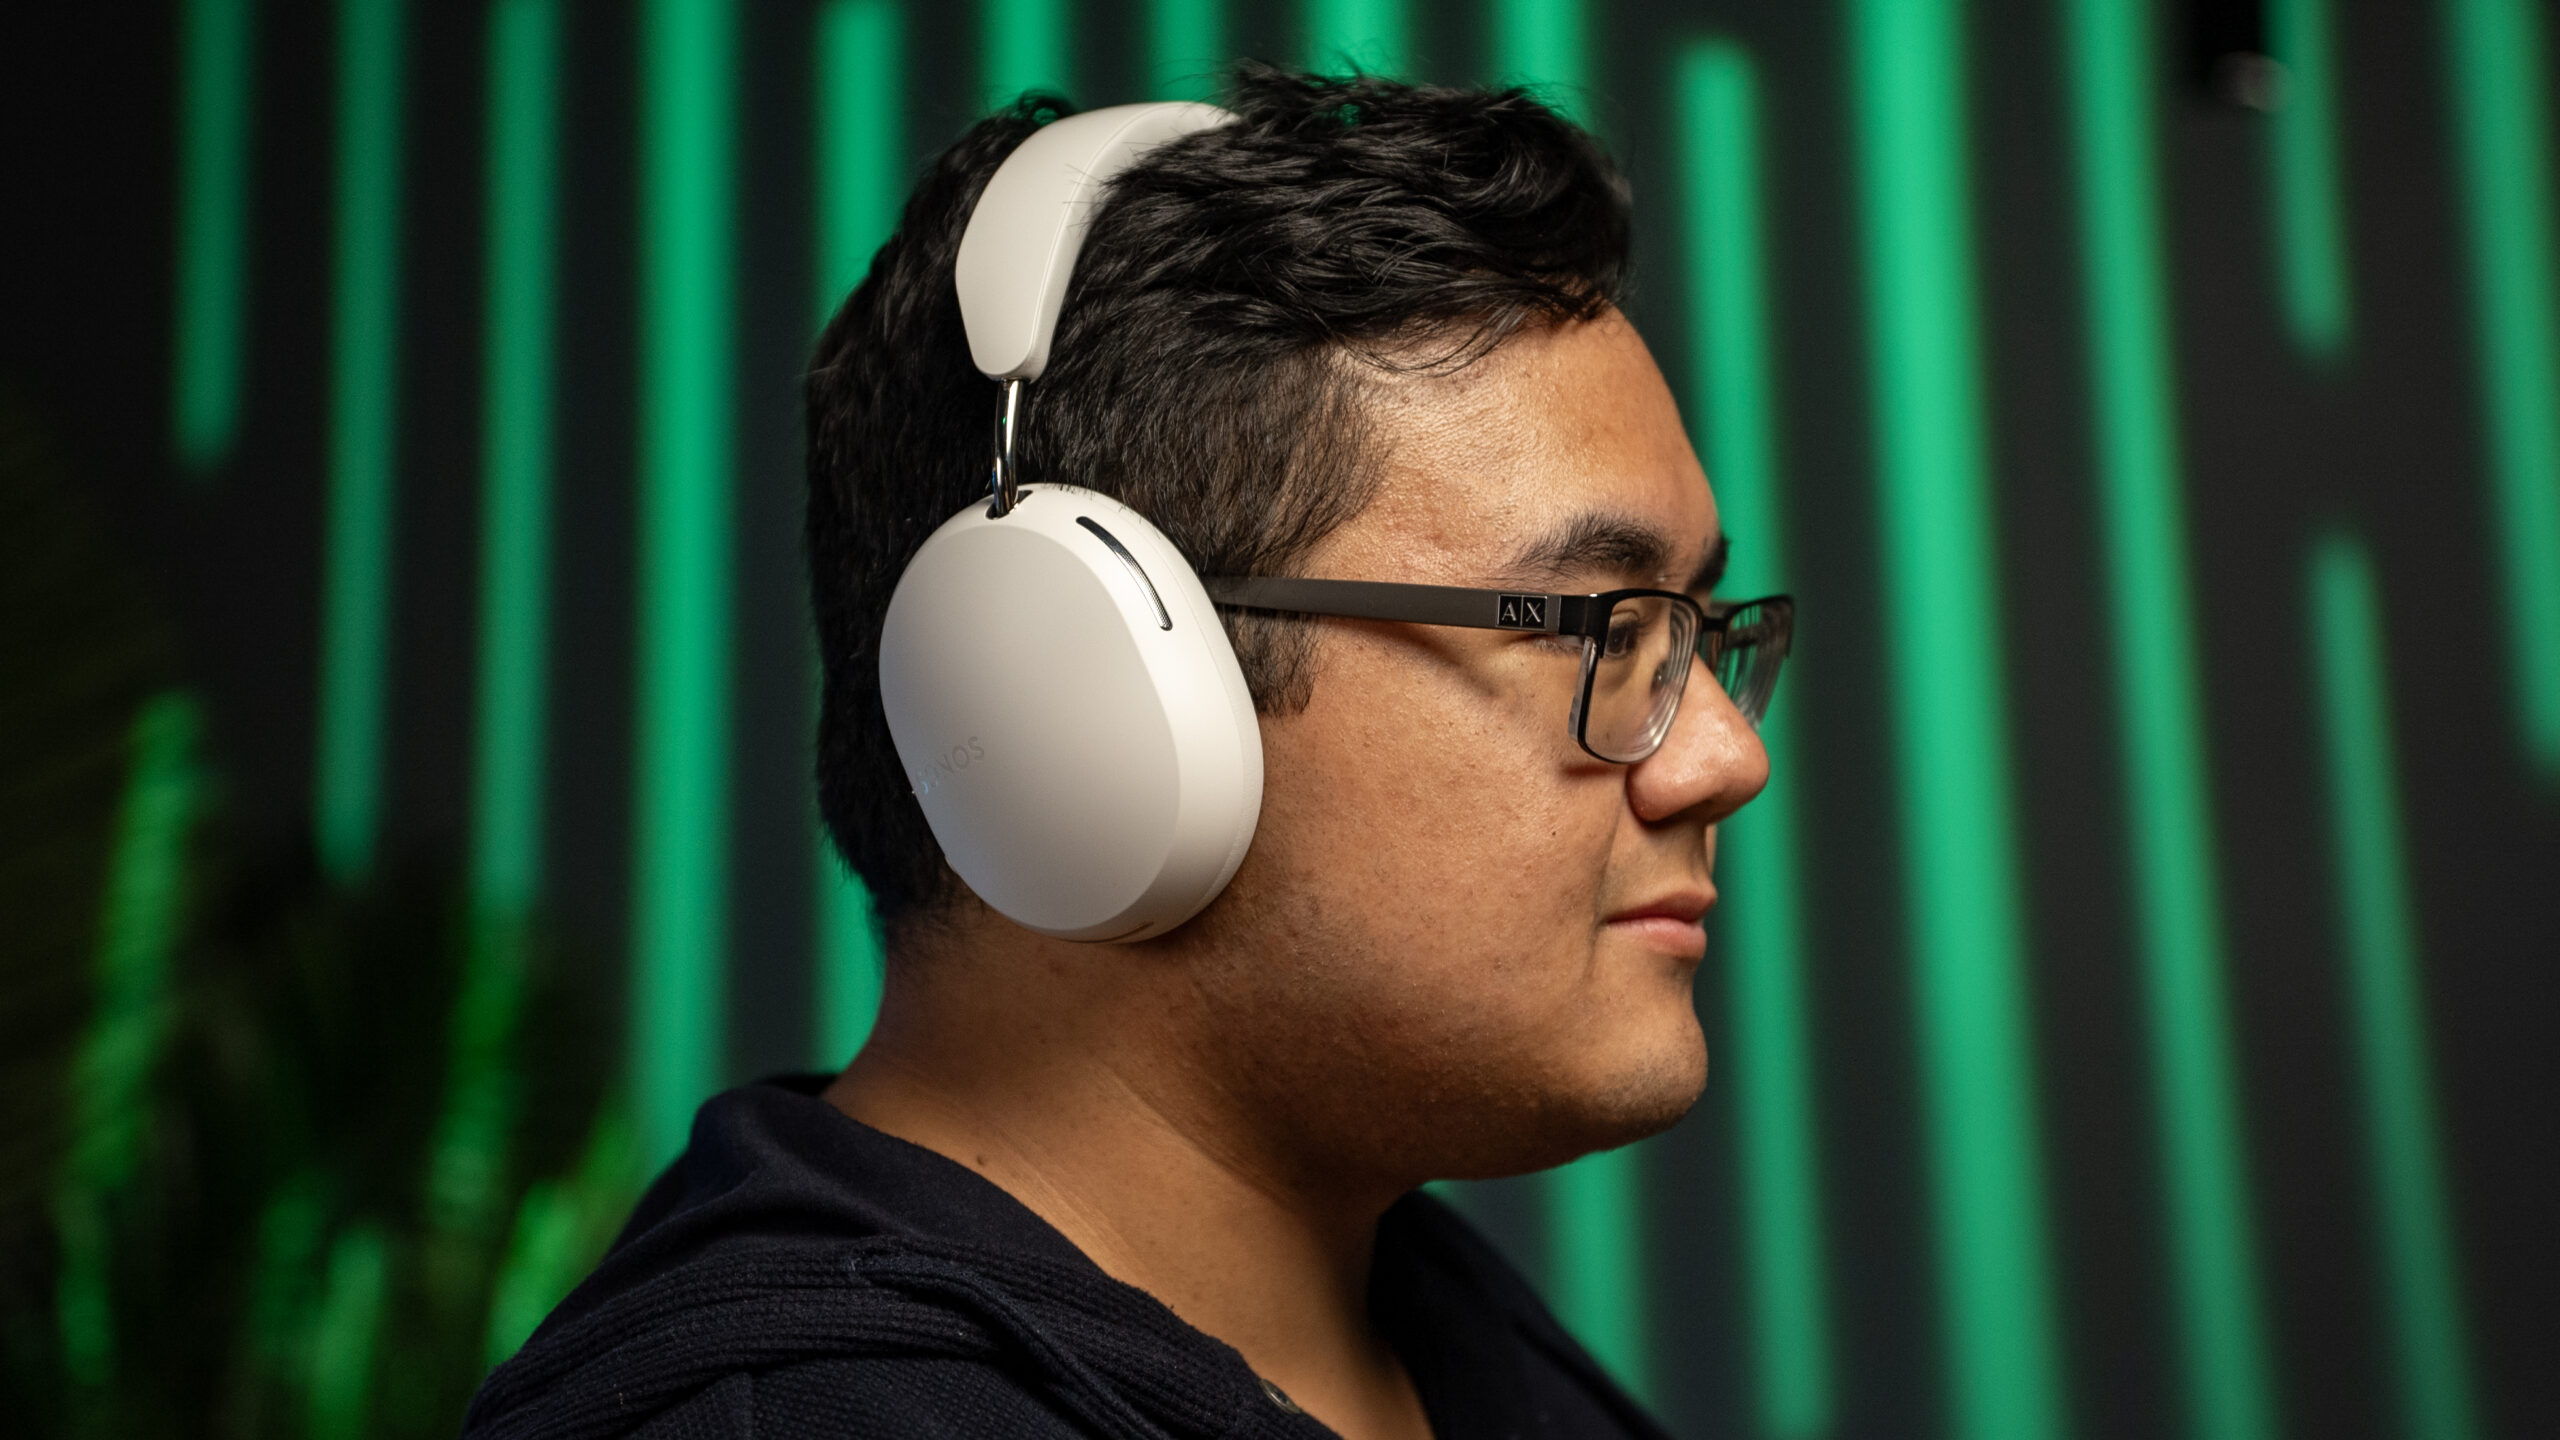 A side profile photo of a man wearing the Sonos Ace headphones